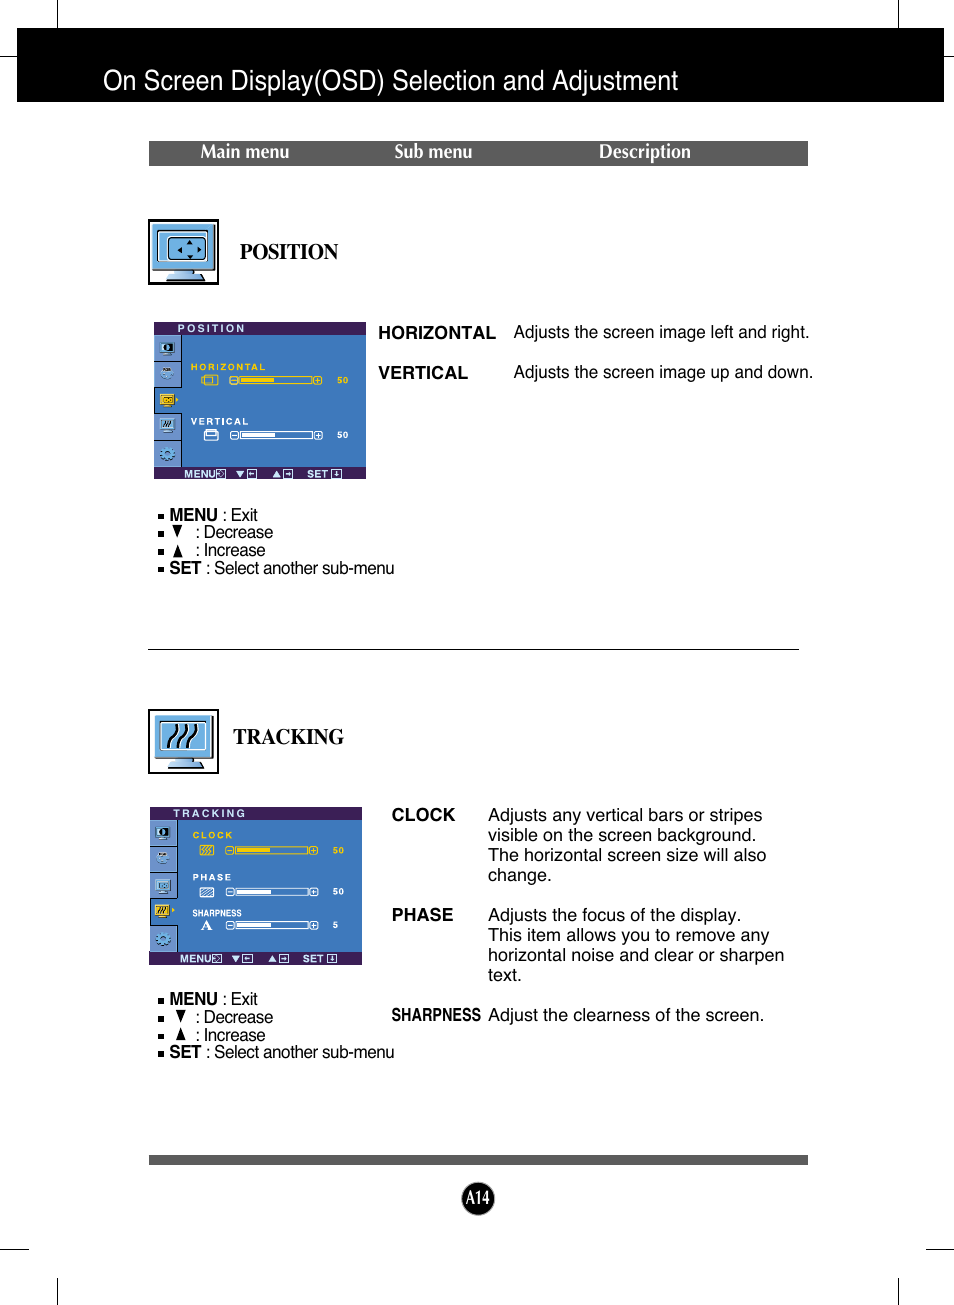 Position, Tracking, On screen display(osd) selection and adjustment | LG L192WS-SN User Manual | Page 15 / 24